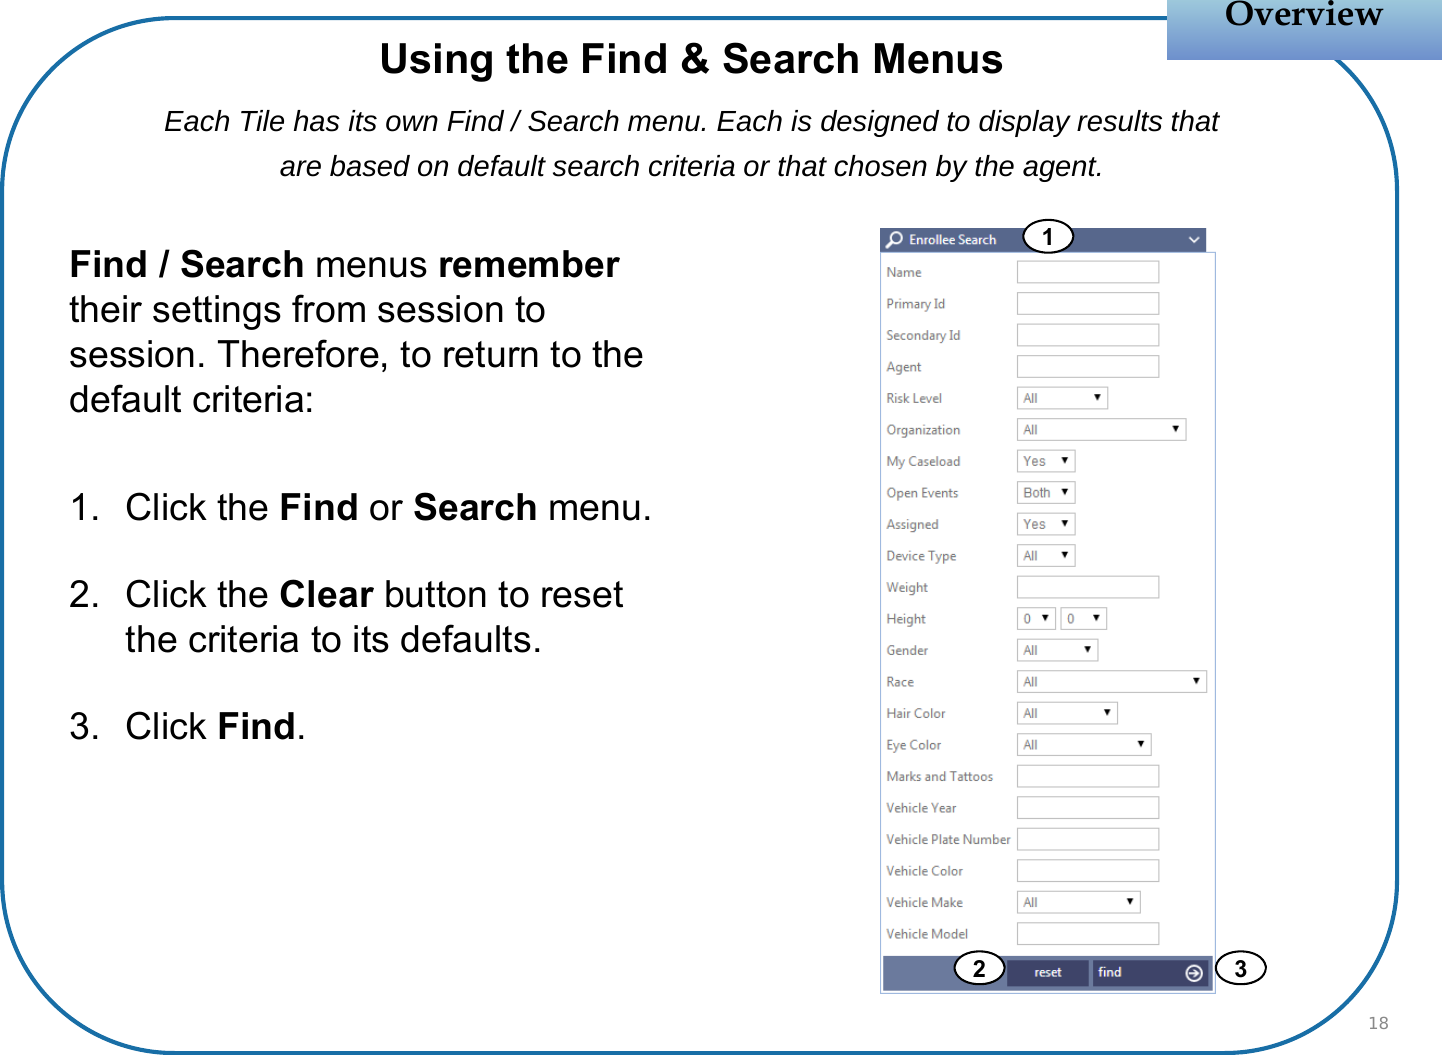 Find / Search menus remember their settings from session to session. Therefore, to return to the default criteria:1. Click the Find or Search menu.2. Click the Clear button to reset the criteria to its defaults.3. Click Find. OverviewOverview18Using the Find &amp; Search MenusEach Tile has its own Find / Search menu. Each is designed to display results that are based on default search criteria or that chosen by the agent.12 3